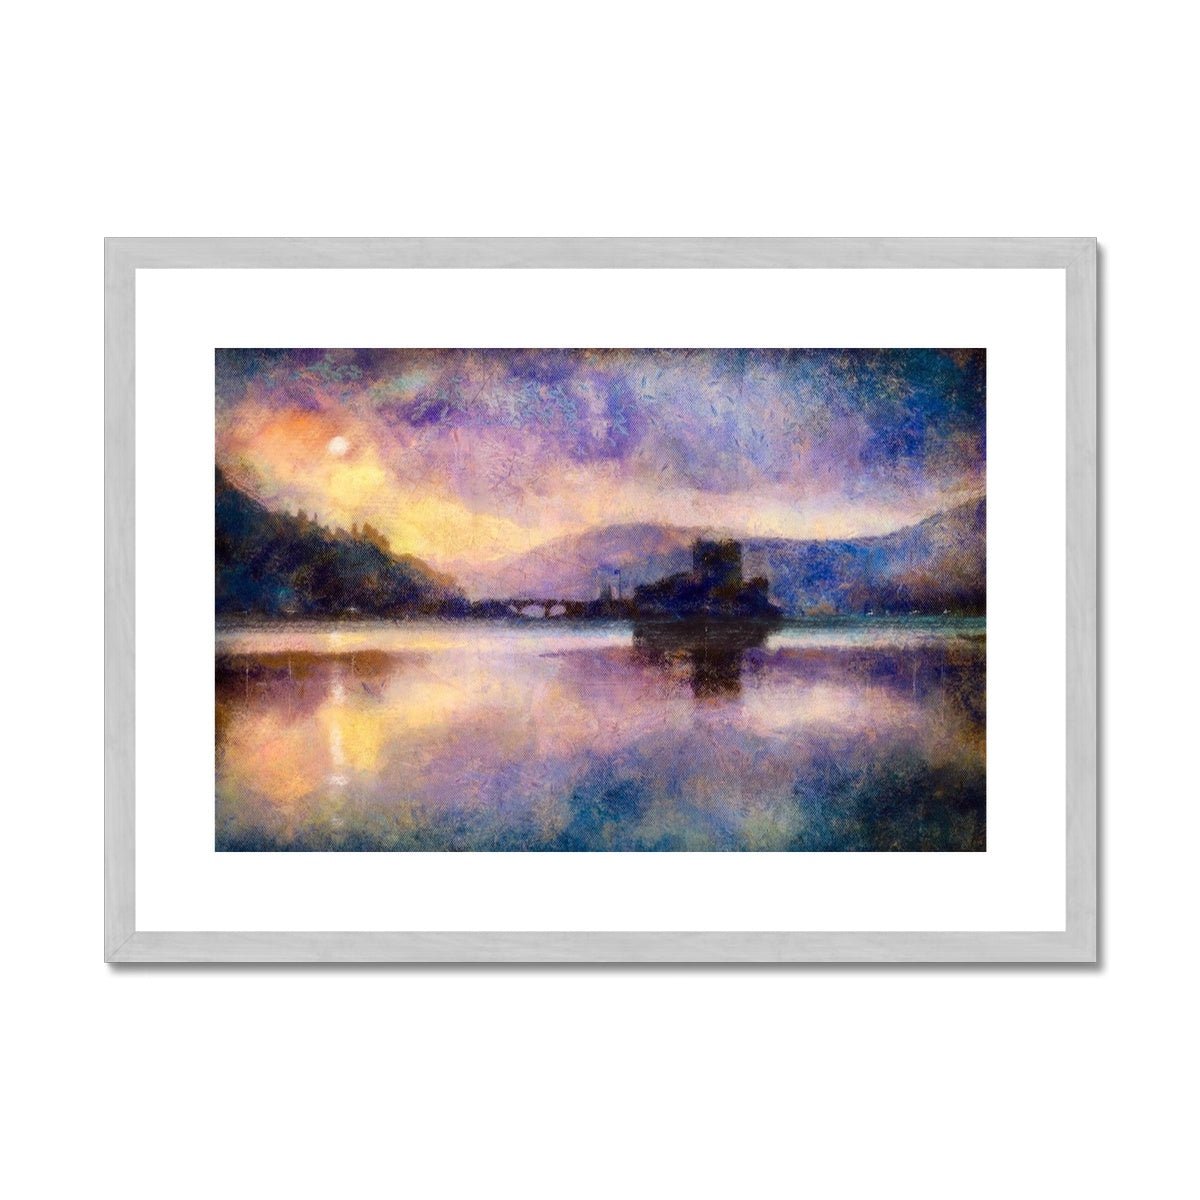 Eilean Donan Castle Moonlight Painting | Antique Framed & Mounted Prints From Scotland-Antique Framed & Mounted Prints-Scottish Castles Art Gallery-A2 Landscape-Silver Frame-Paintings, Prints, Homeware, Art Gifts From Scotland By Scottish Artist Kevin Hunter